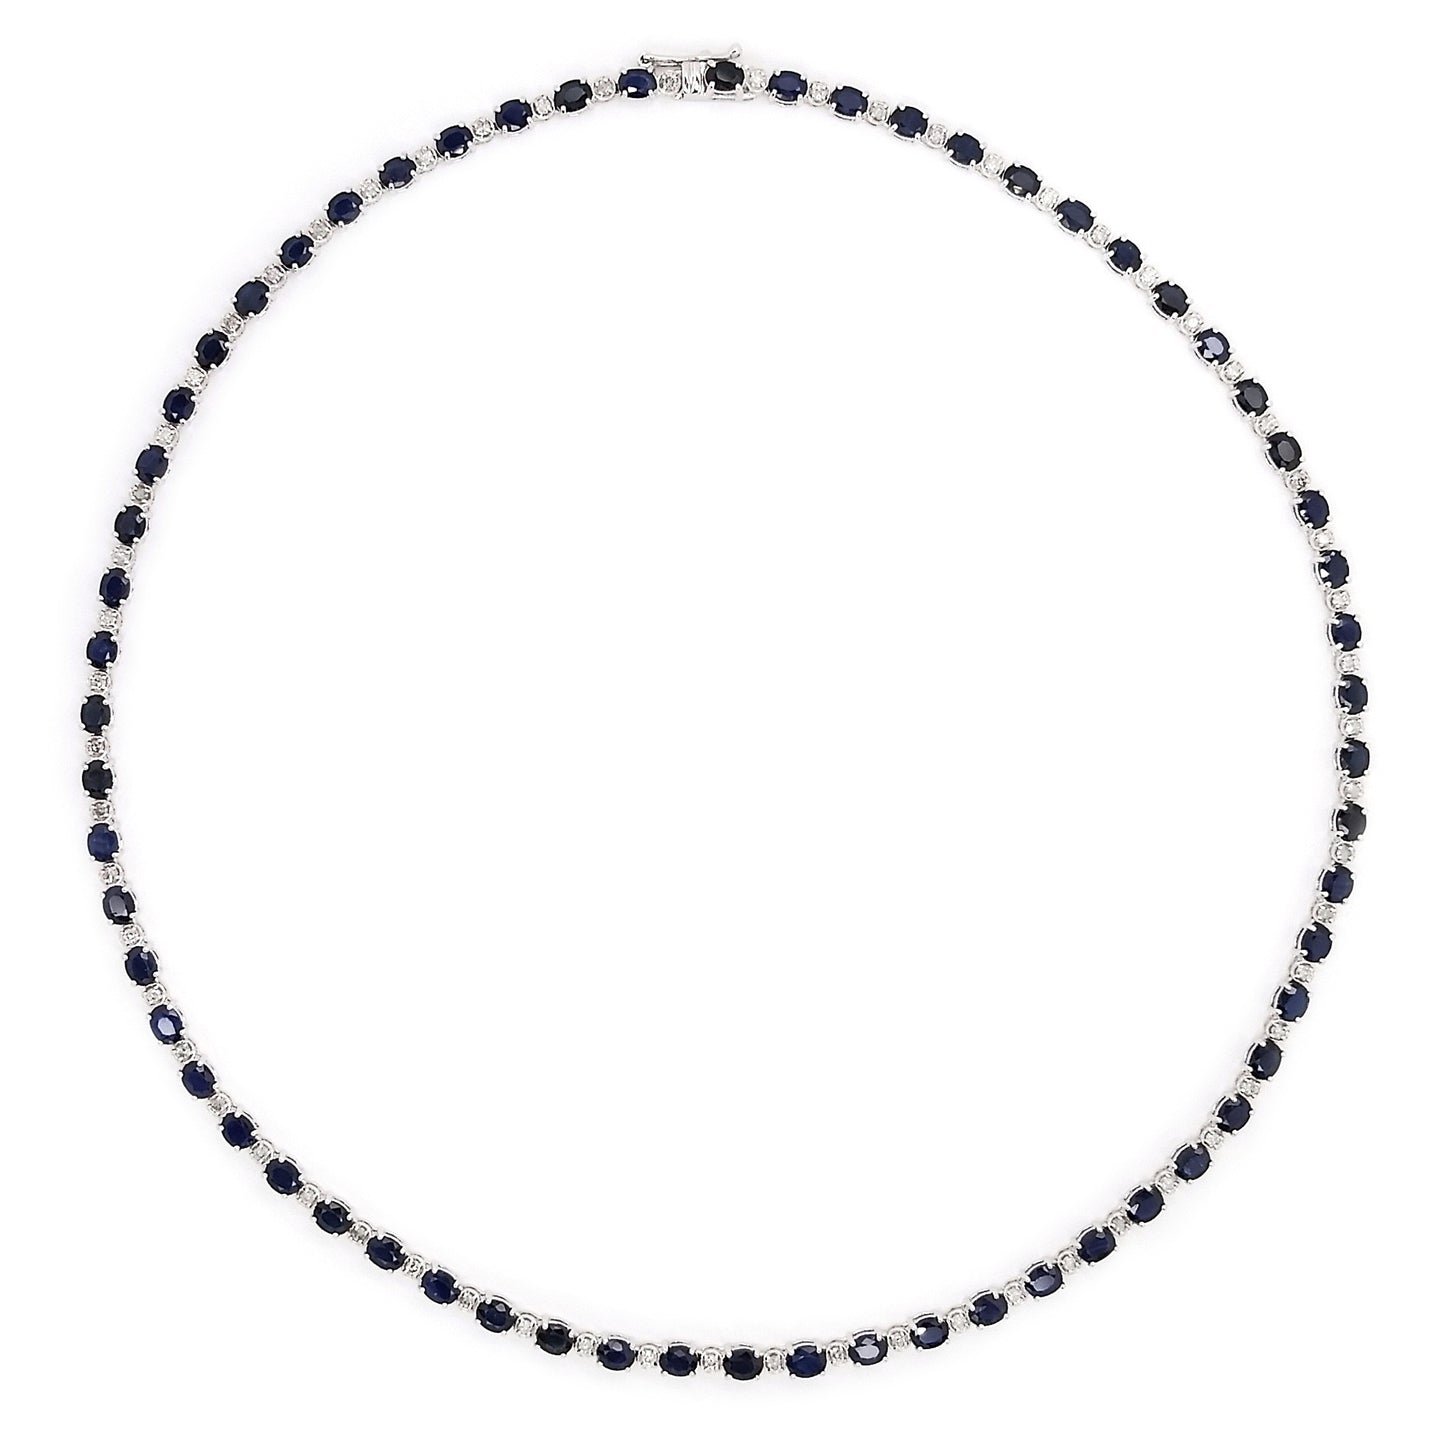 12.68ct NATURAL SAPPHIRES and 0.90ct NATURAL DIAMONDS set with 18K White Gold Necklace